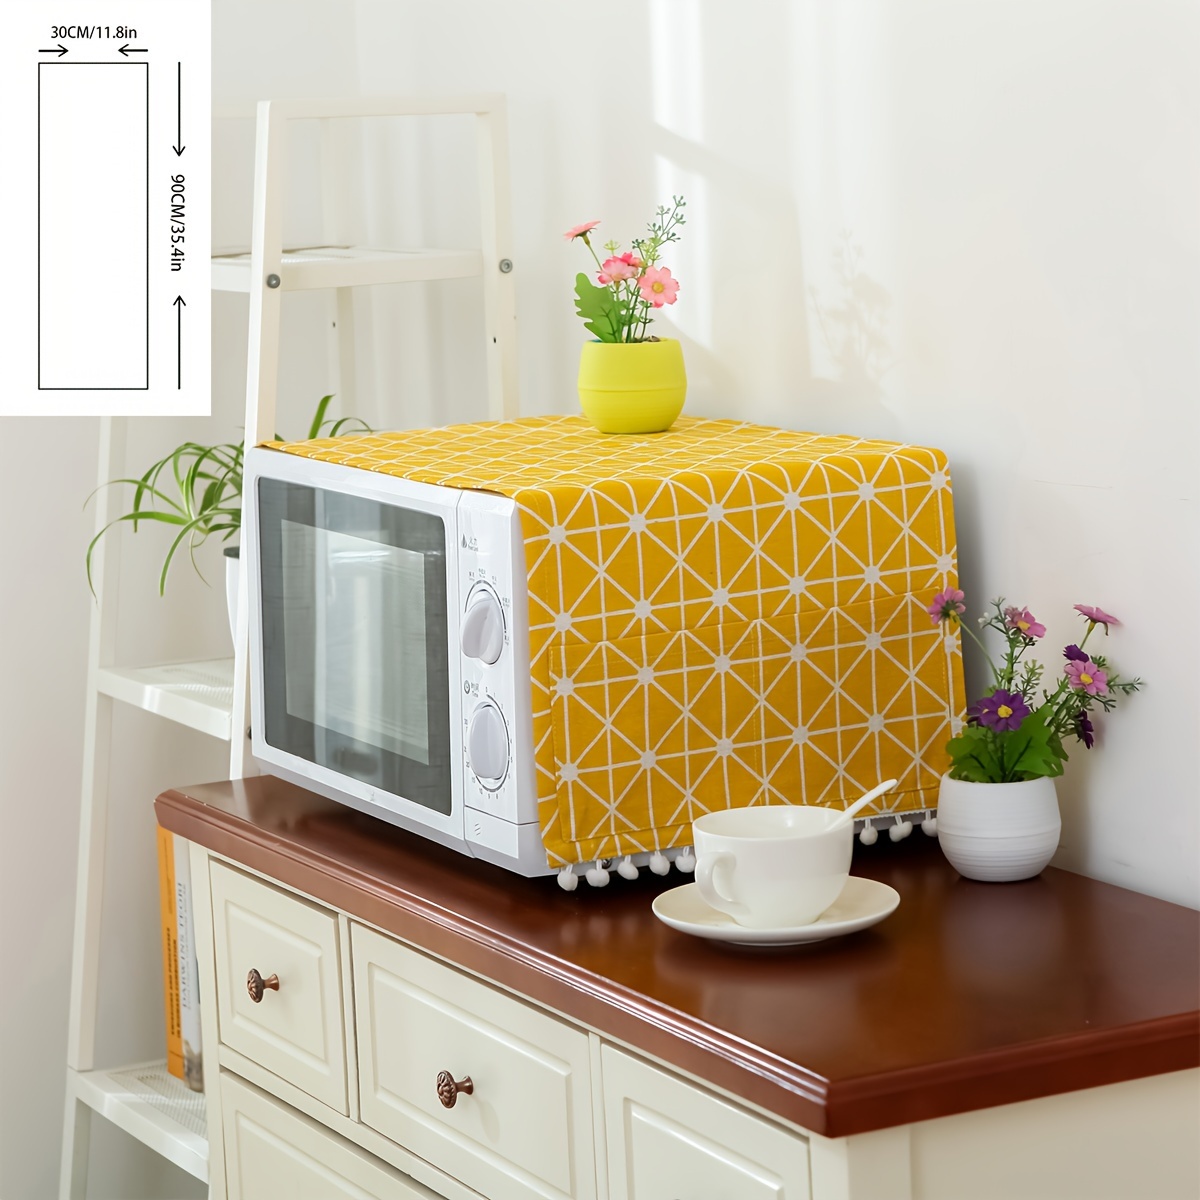 Oven Cover with 2 Accessary Pockets, Oven Dustproof Cover, Dust Proof Oil Proof Microwave Oven Cover, Linen Cloth, Size: 100, Orange